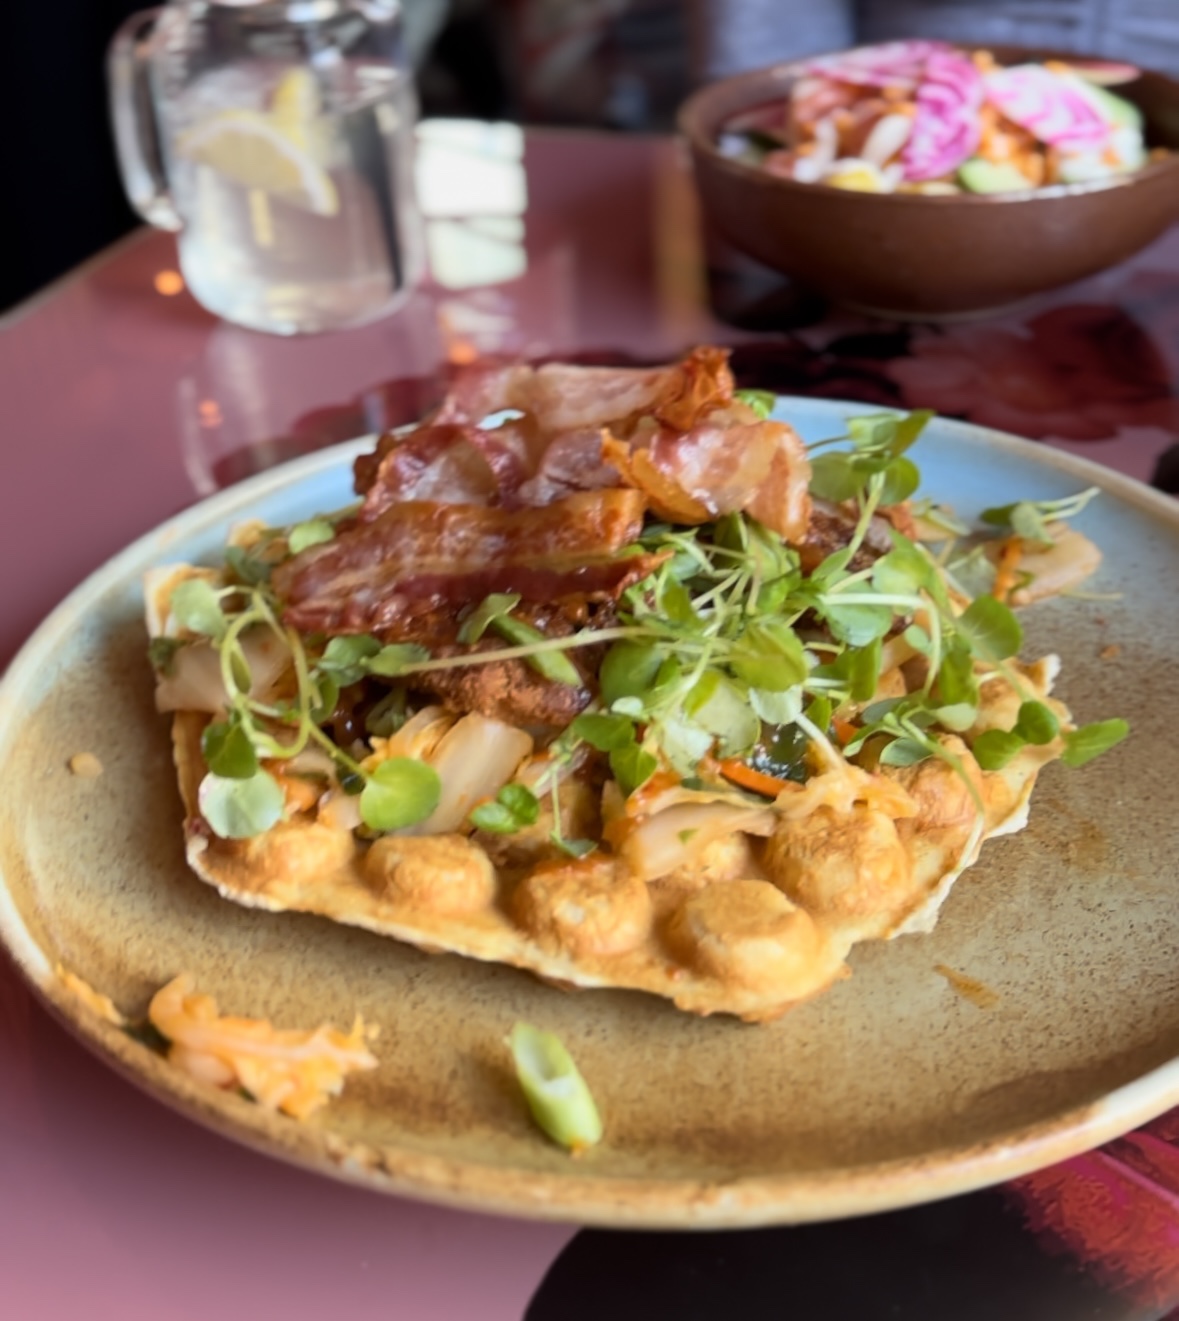 Chicken and waffles - The streetfood club